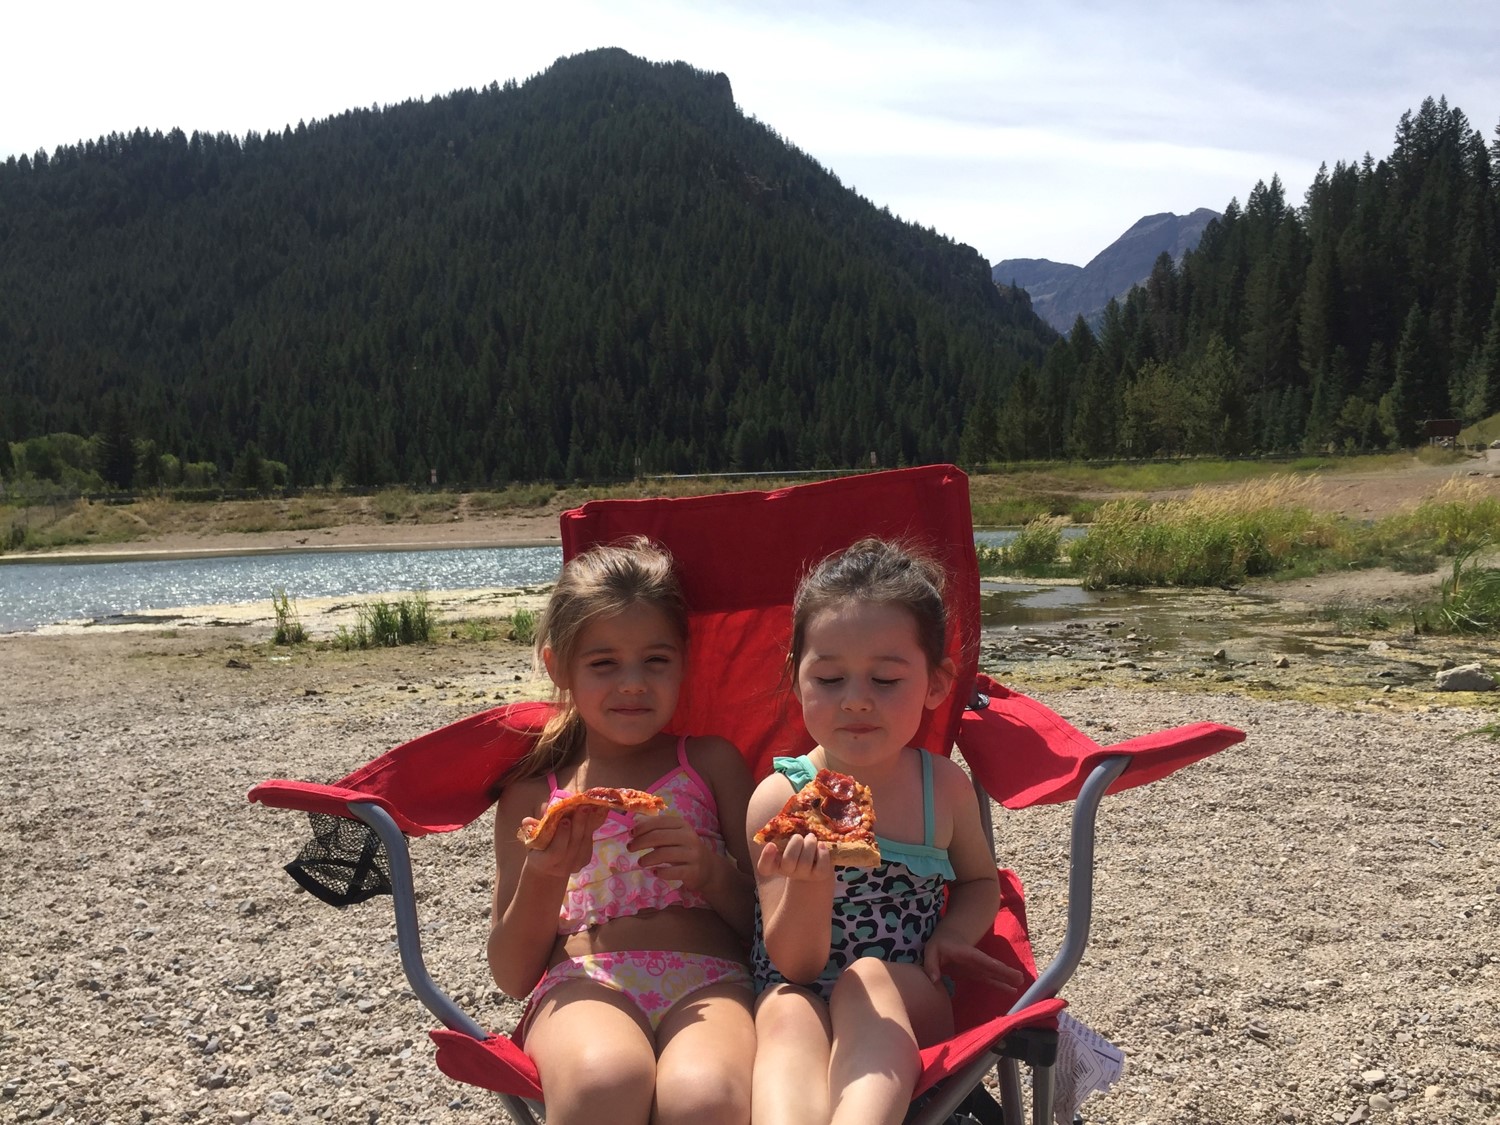     
 
      Lolah and Kaylie Palma taking a break from playing by eating pizza at Tibble Fork Lake Uinta National Forest. 